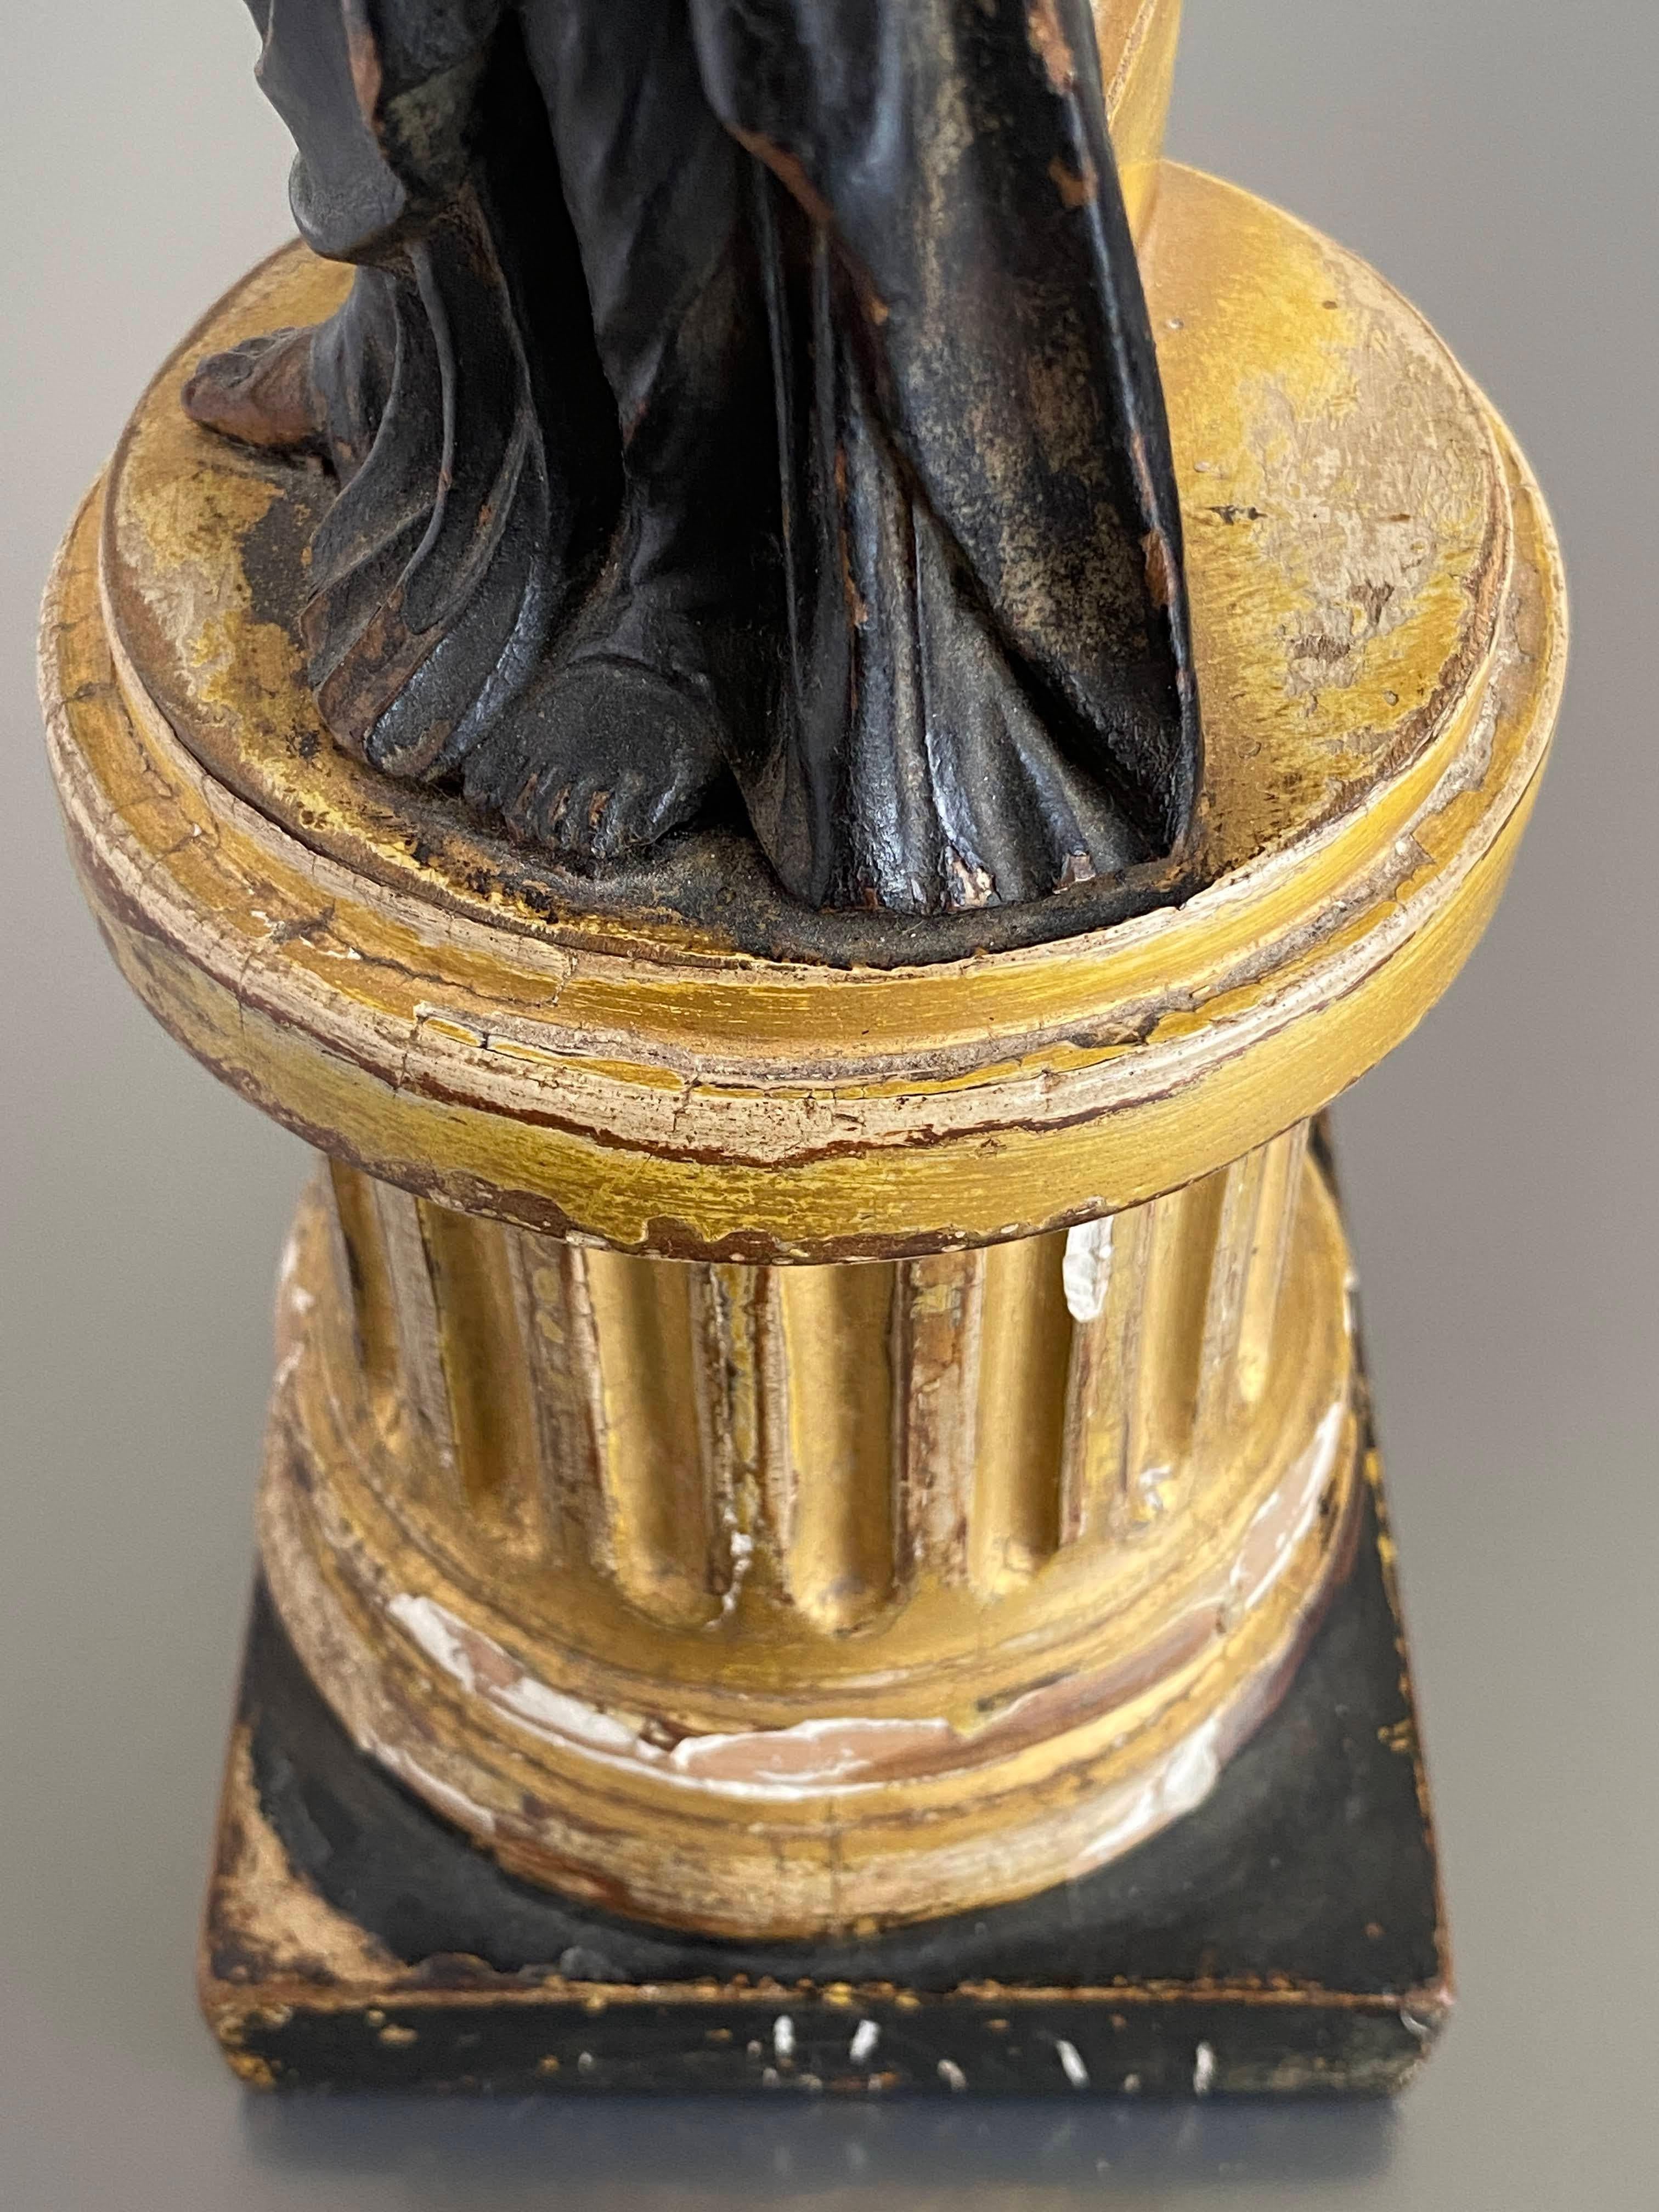 Late 18c Carved Statue of the Roman Goddess 'Fortuna' Standing on a Fluted Gilt 10